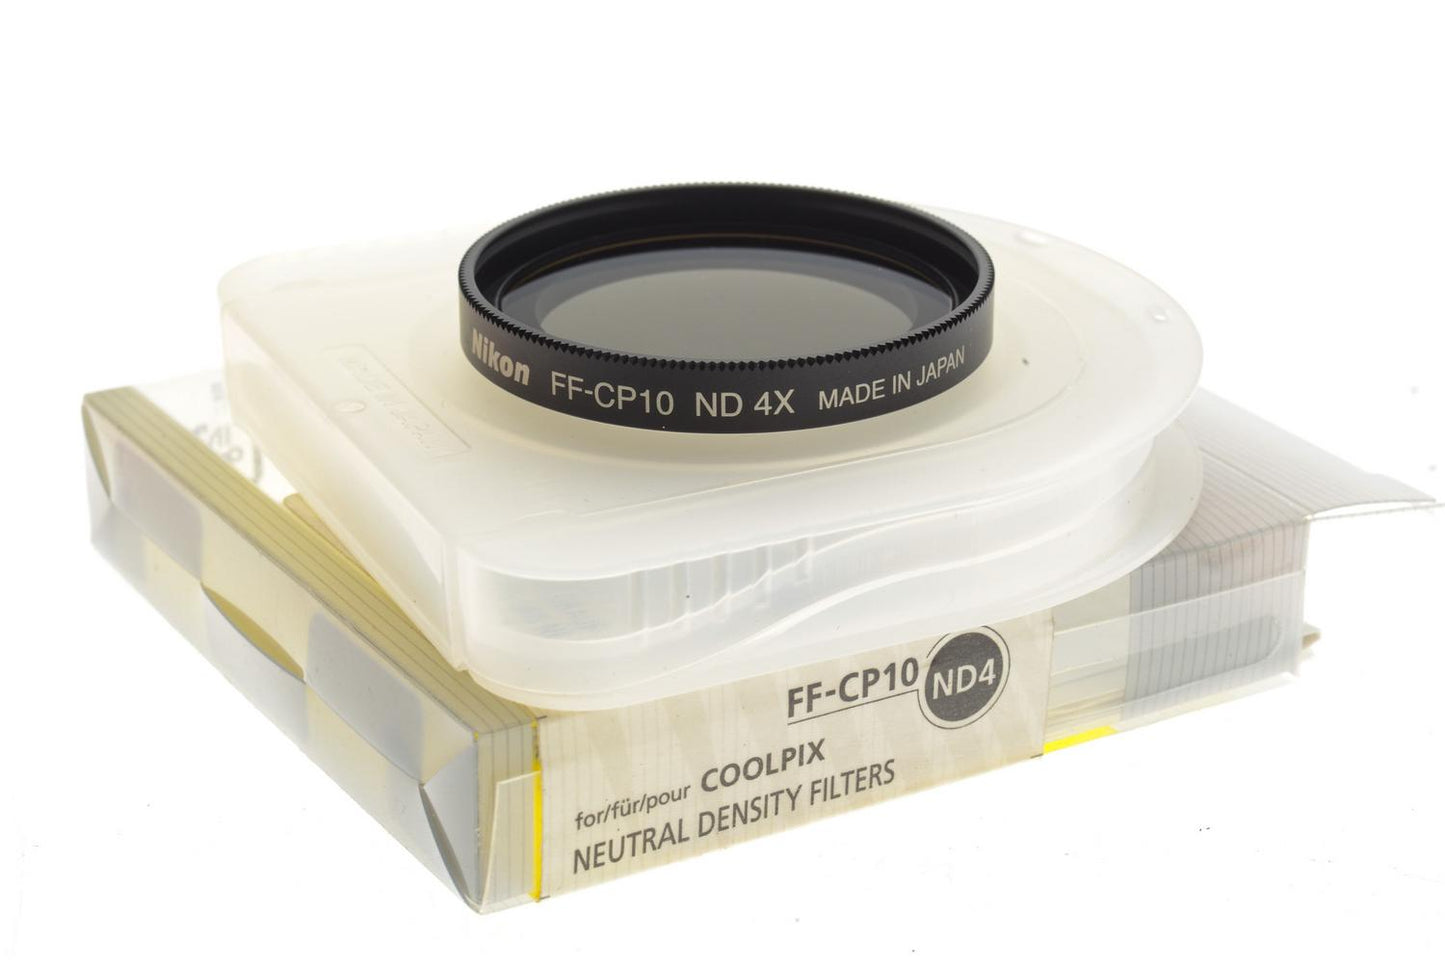 Nikon 48mm Neutral Density Filter FF-CP10 ND4 - Accessory